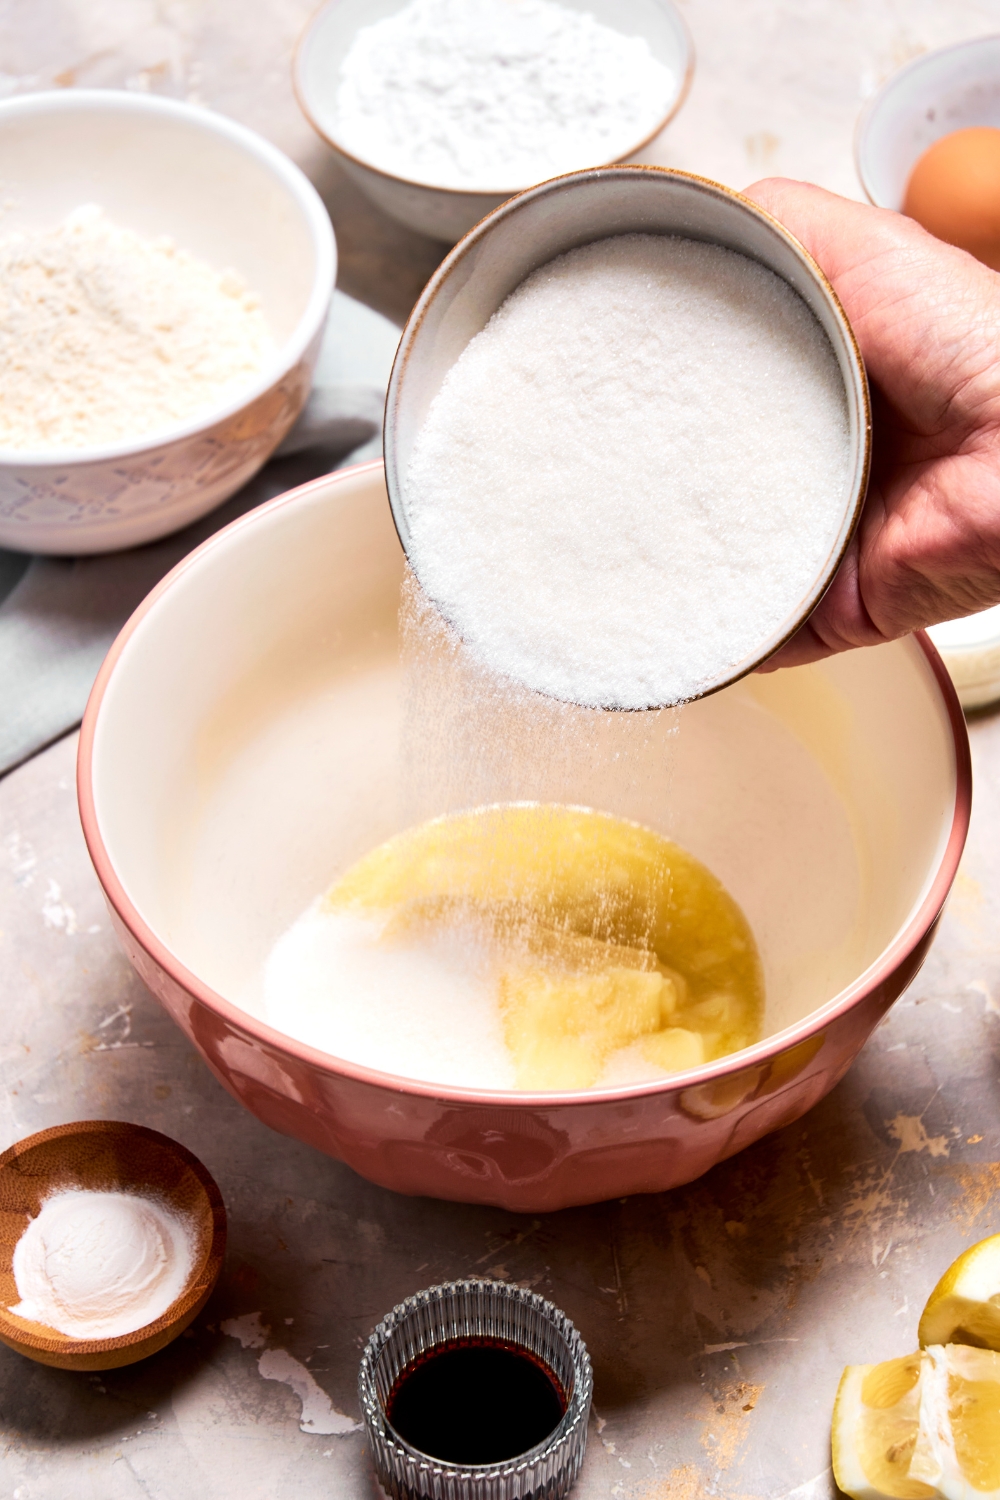 A mixing bowl with the butter and sugar being combined.